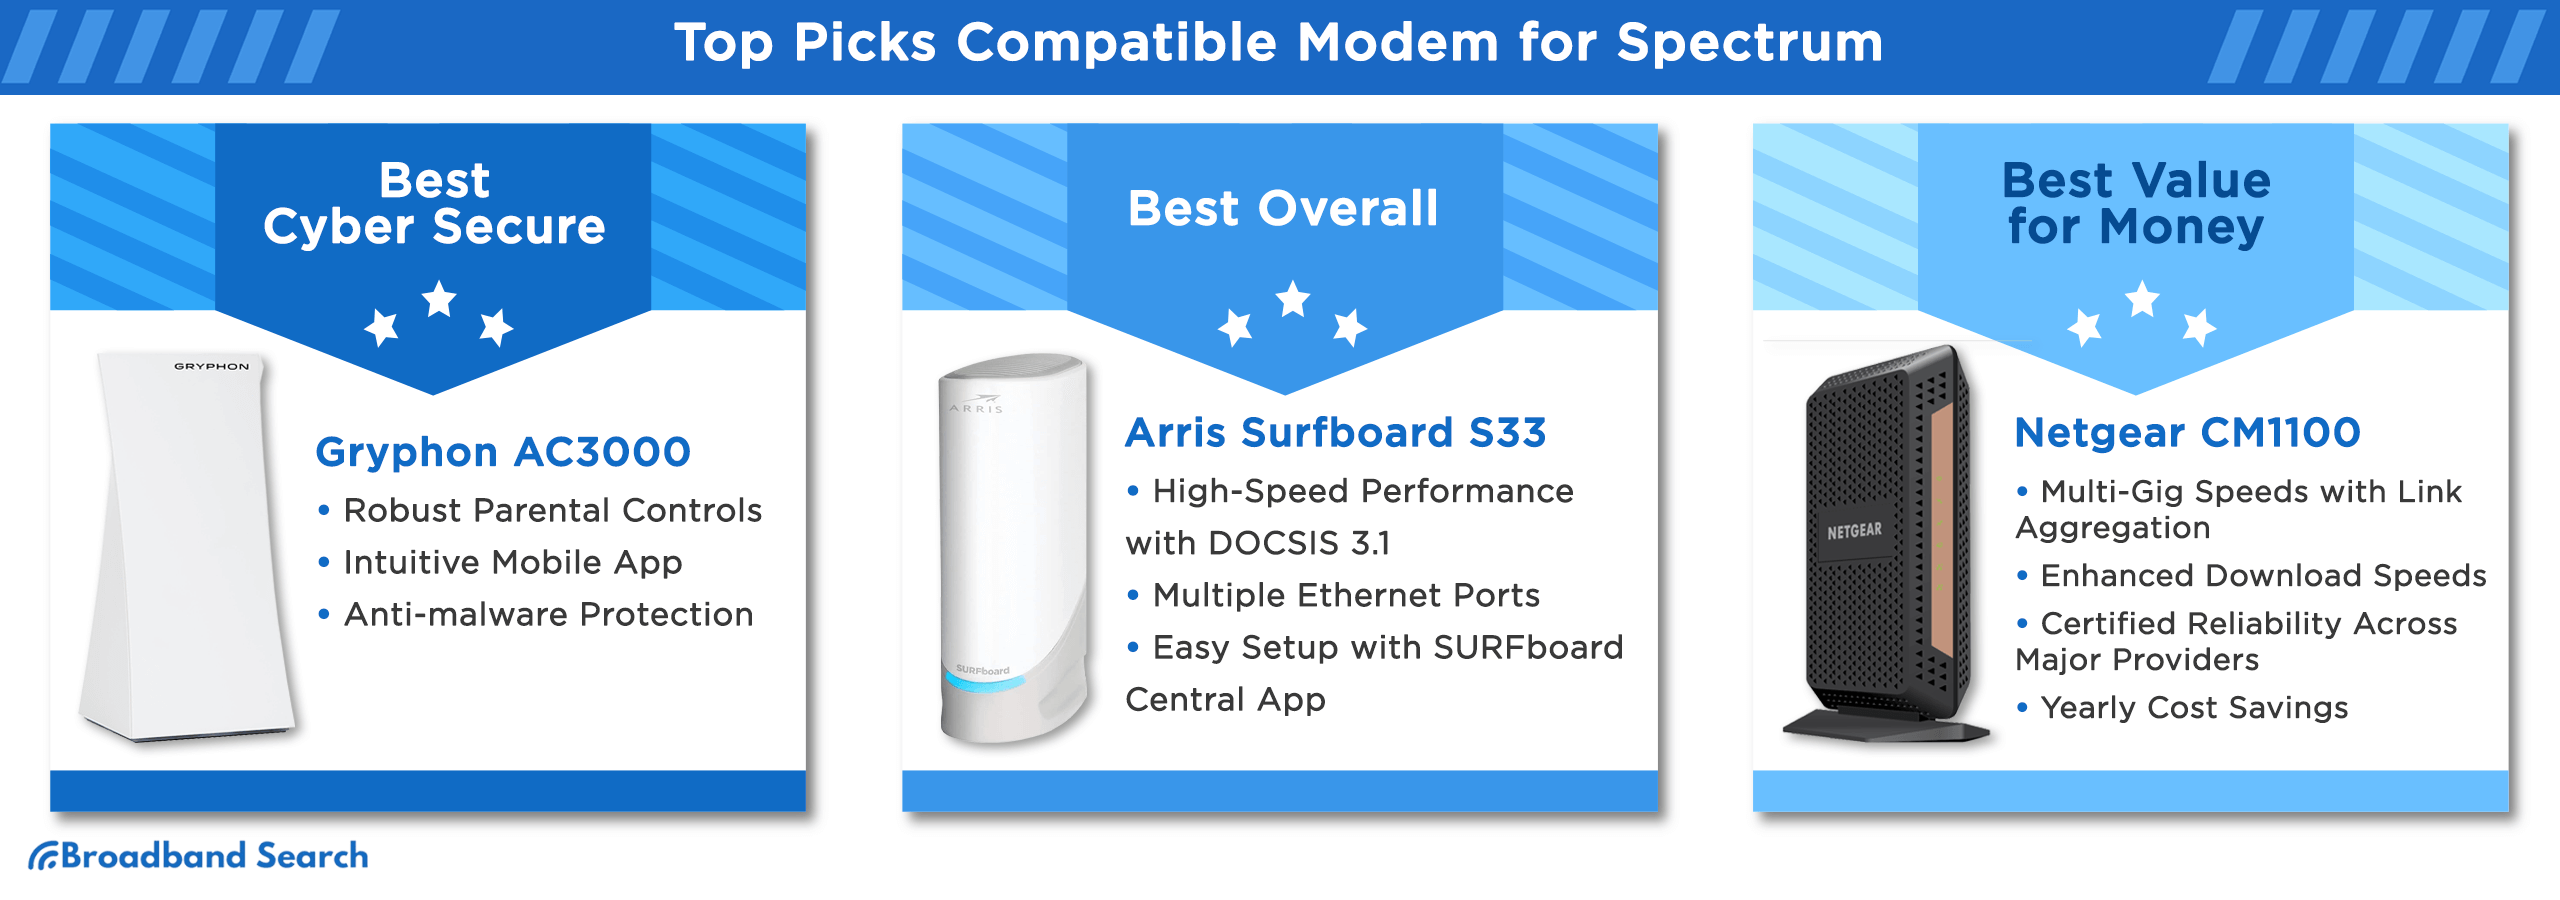 Top picks for a compatible modem for spectrum